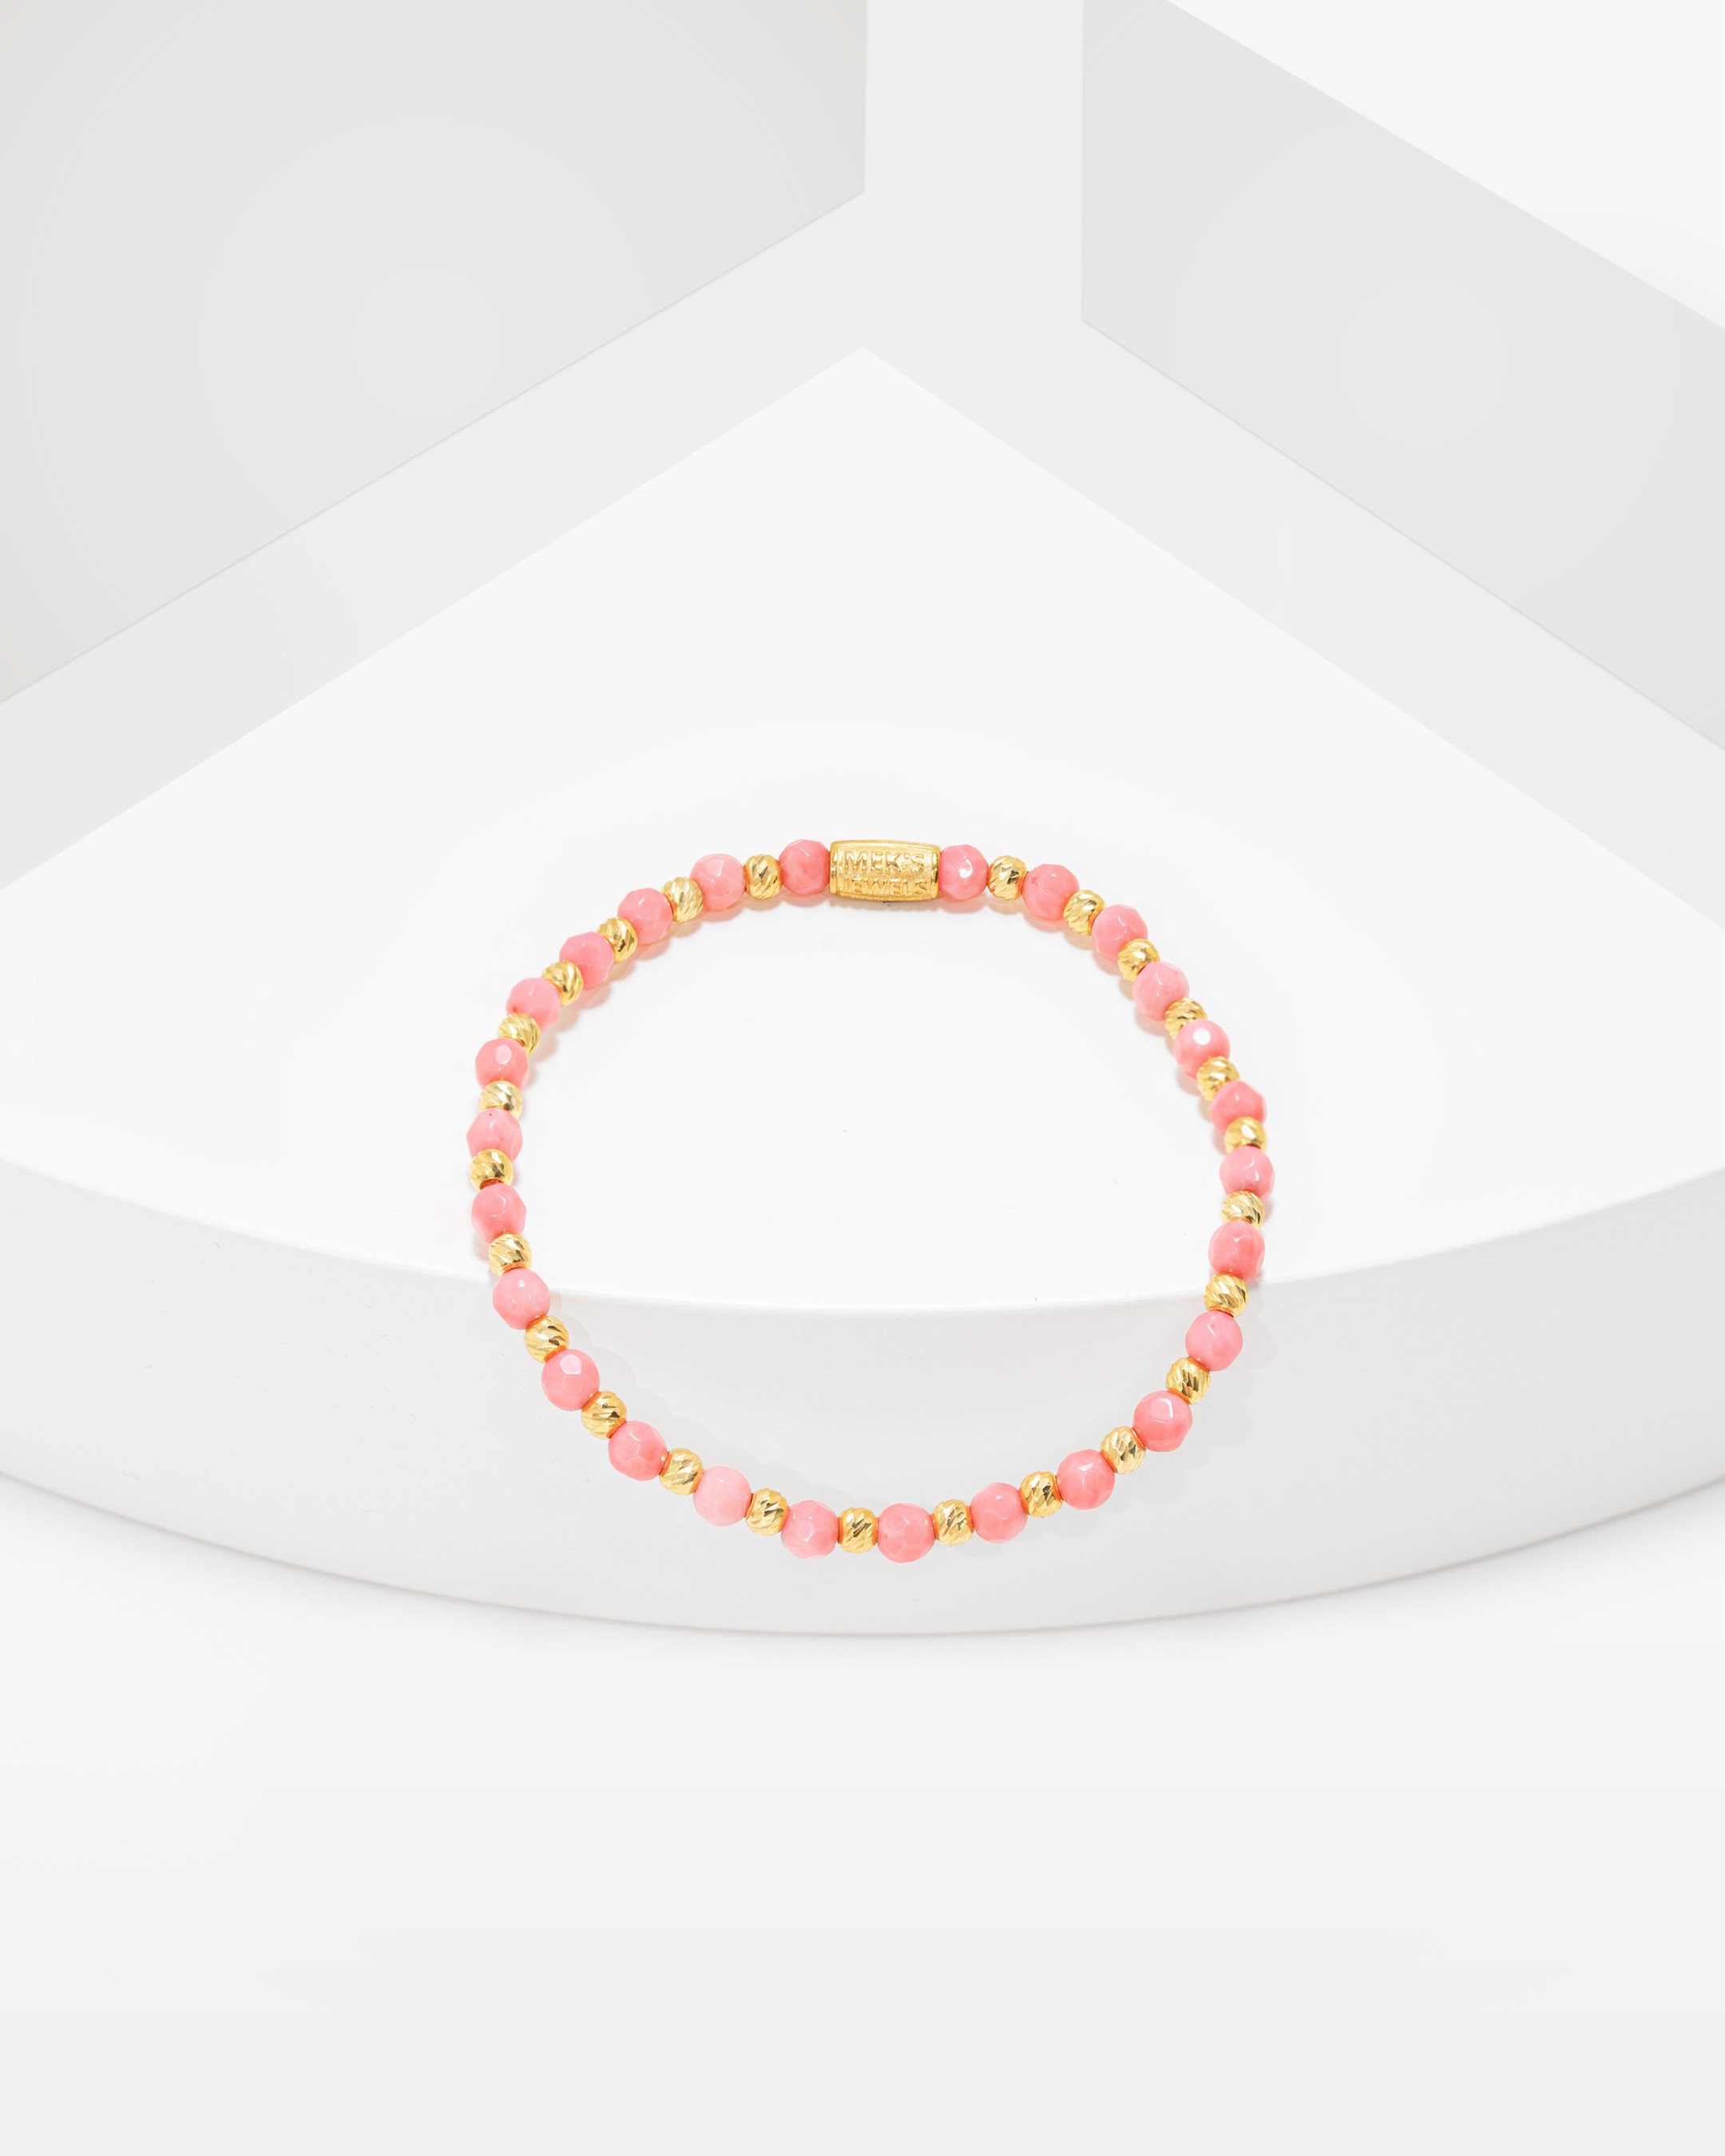 11.5 Carat Sterling Silver Bracelet with Natural Pink Coral Stone - Gold